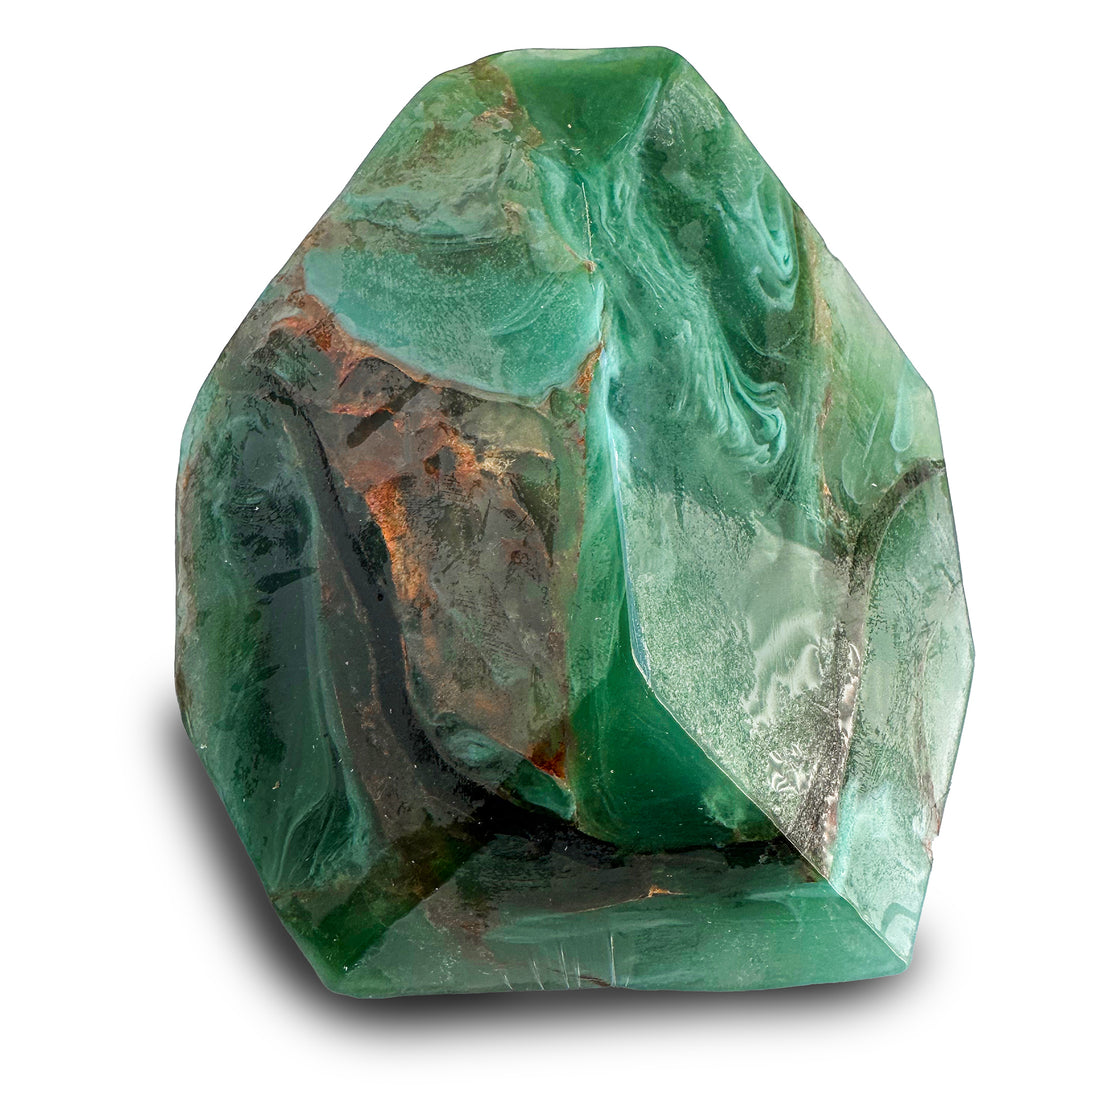 Jade SoapRock® - bar of beautiful jade green marbled soap with strands of coppery gold - made to look like the actual rock!